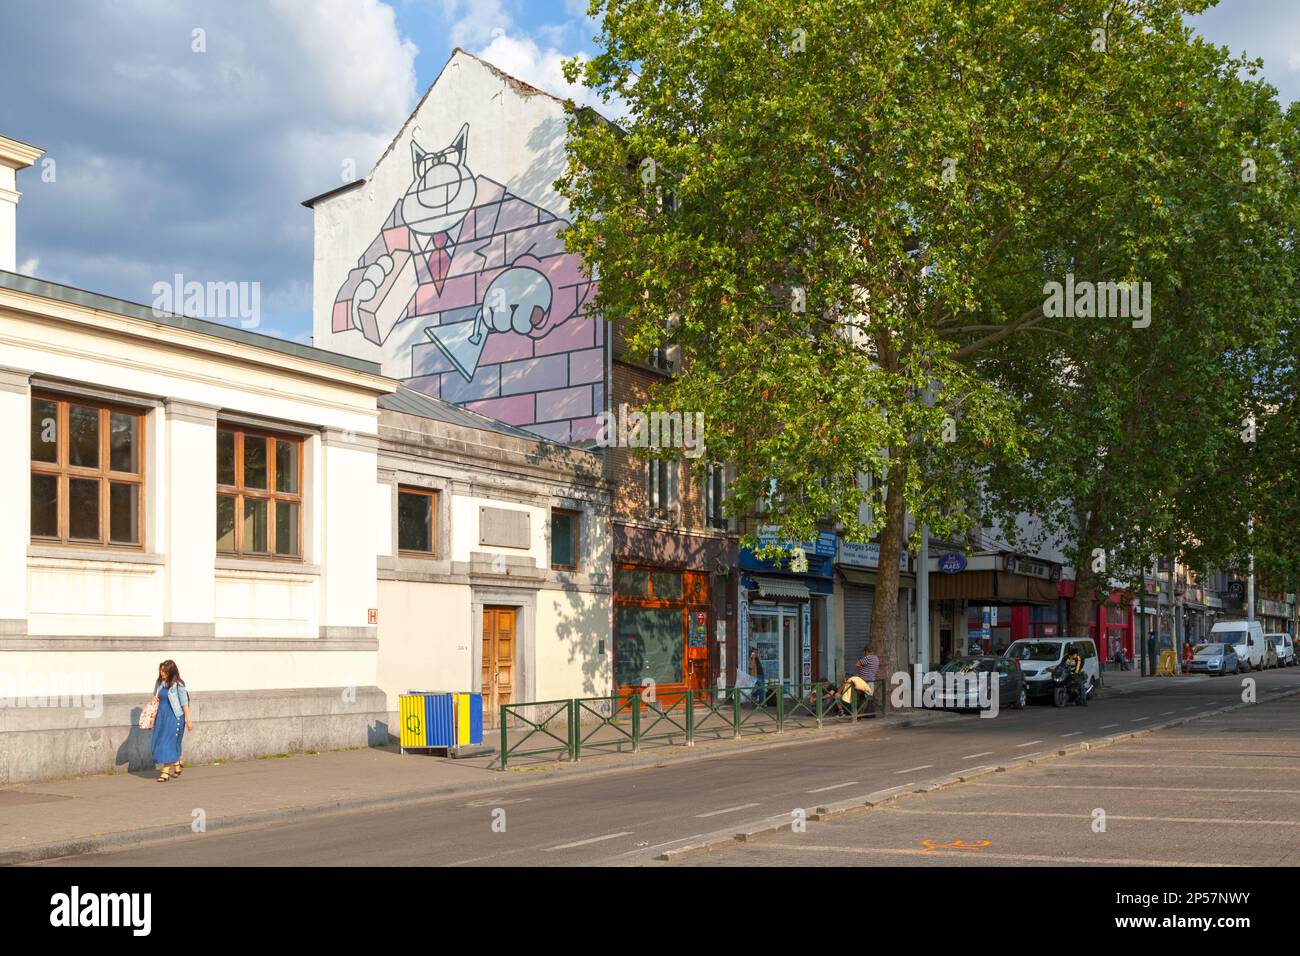 Brussels, Belgium - July 02 2019: The Cat Wall is located 'Boulevard du Midi'. The wall illustrates the Cat building a wall. Based on the comic series Stock Photo